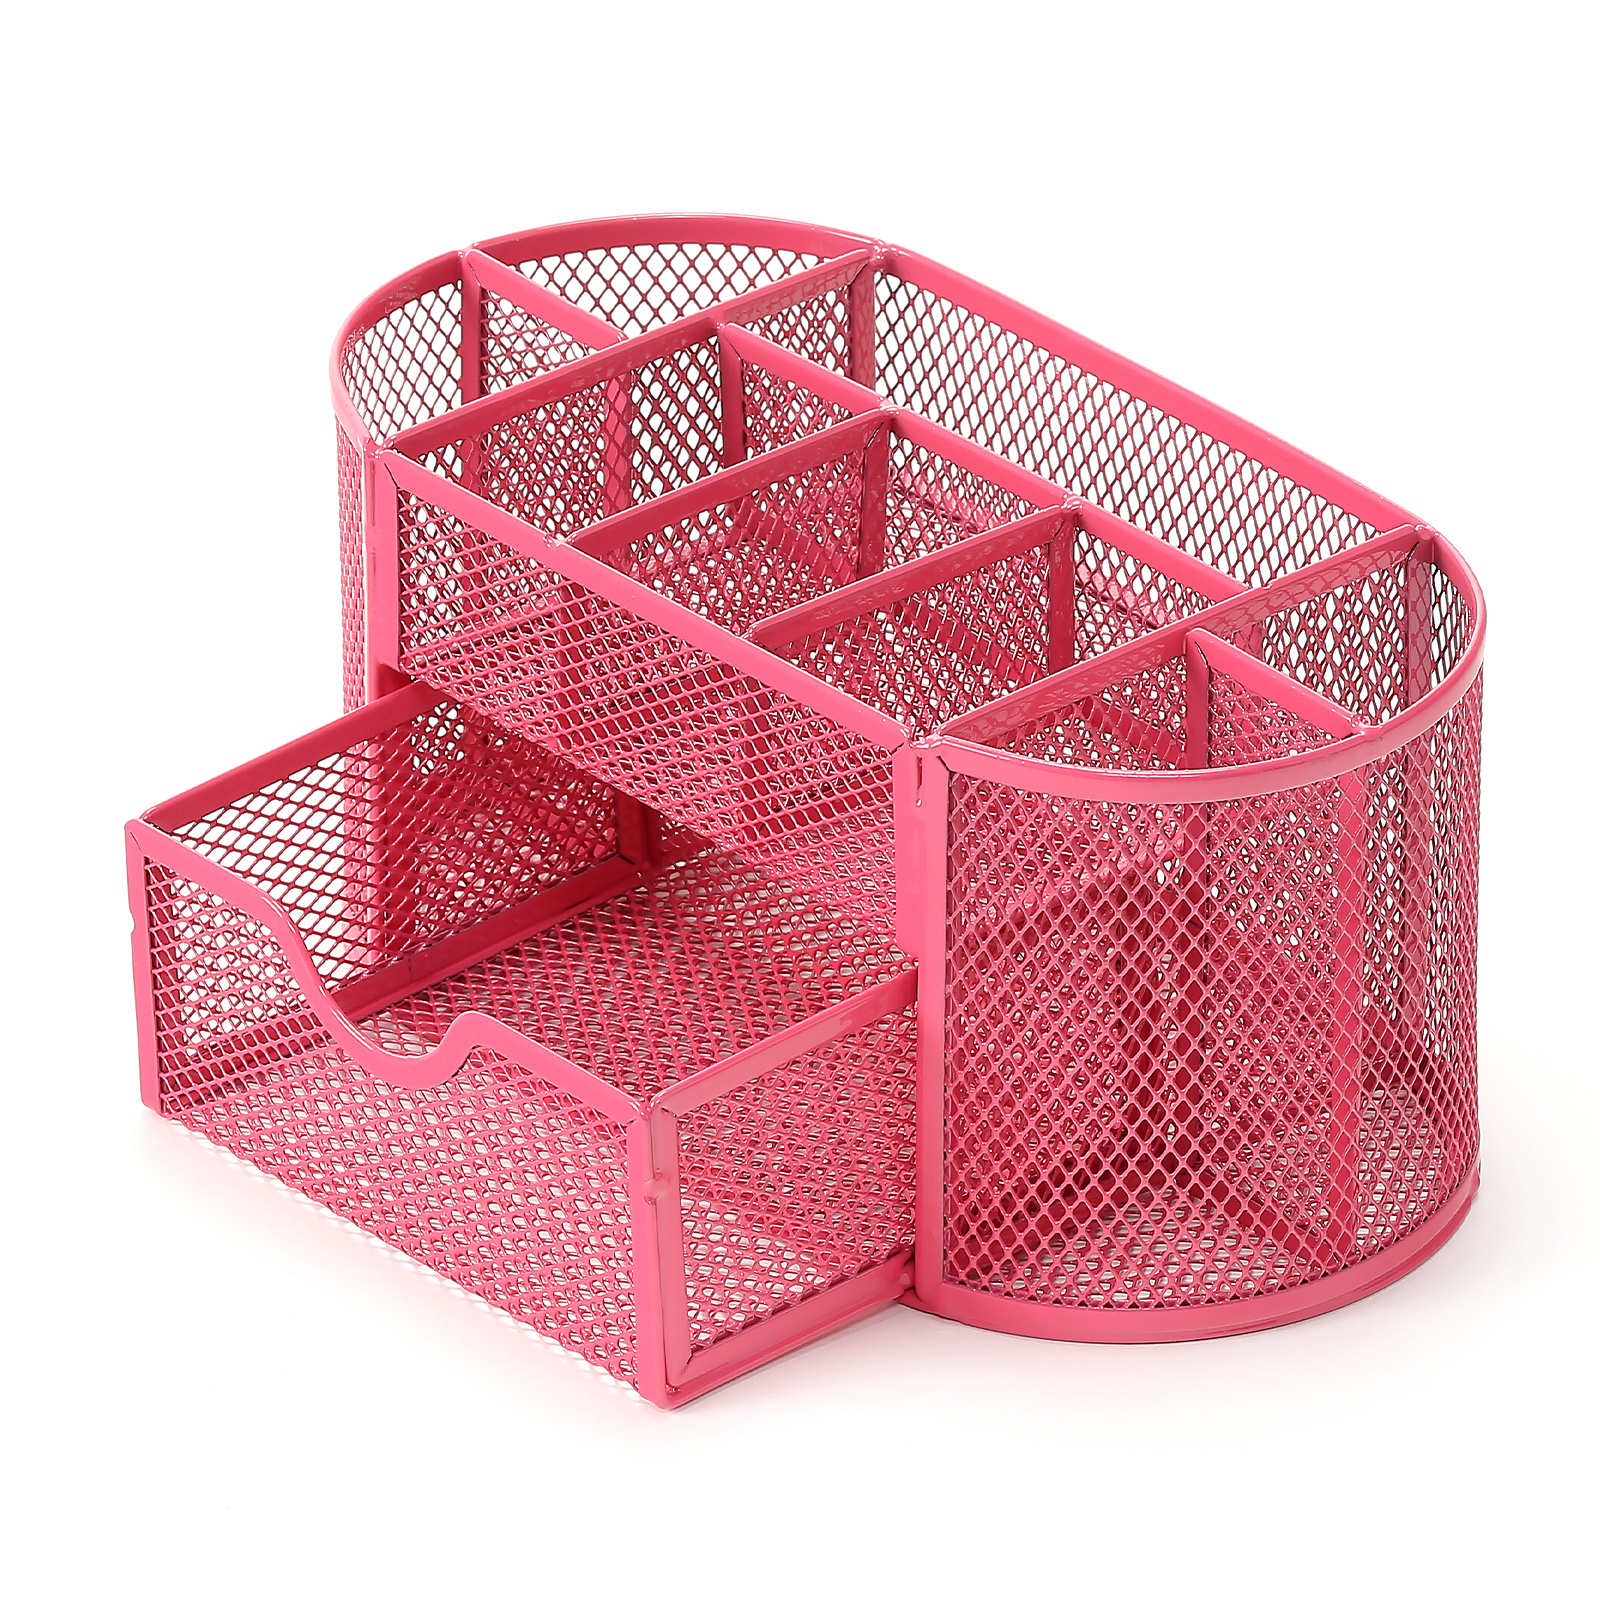 Comix Desk Organizers, Mesh Pen Holder with 8 Compartments and 1 Drawer, Oval Shaped Pencil Holder for Home School Office Sup